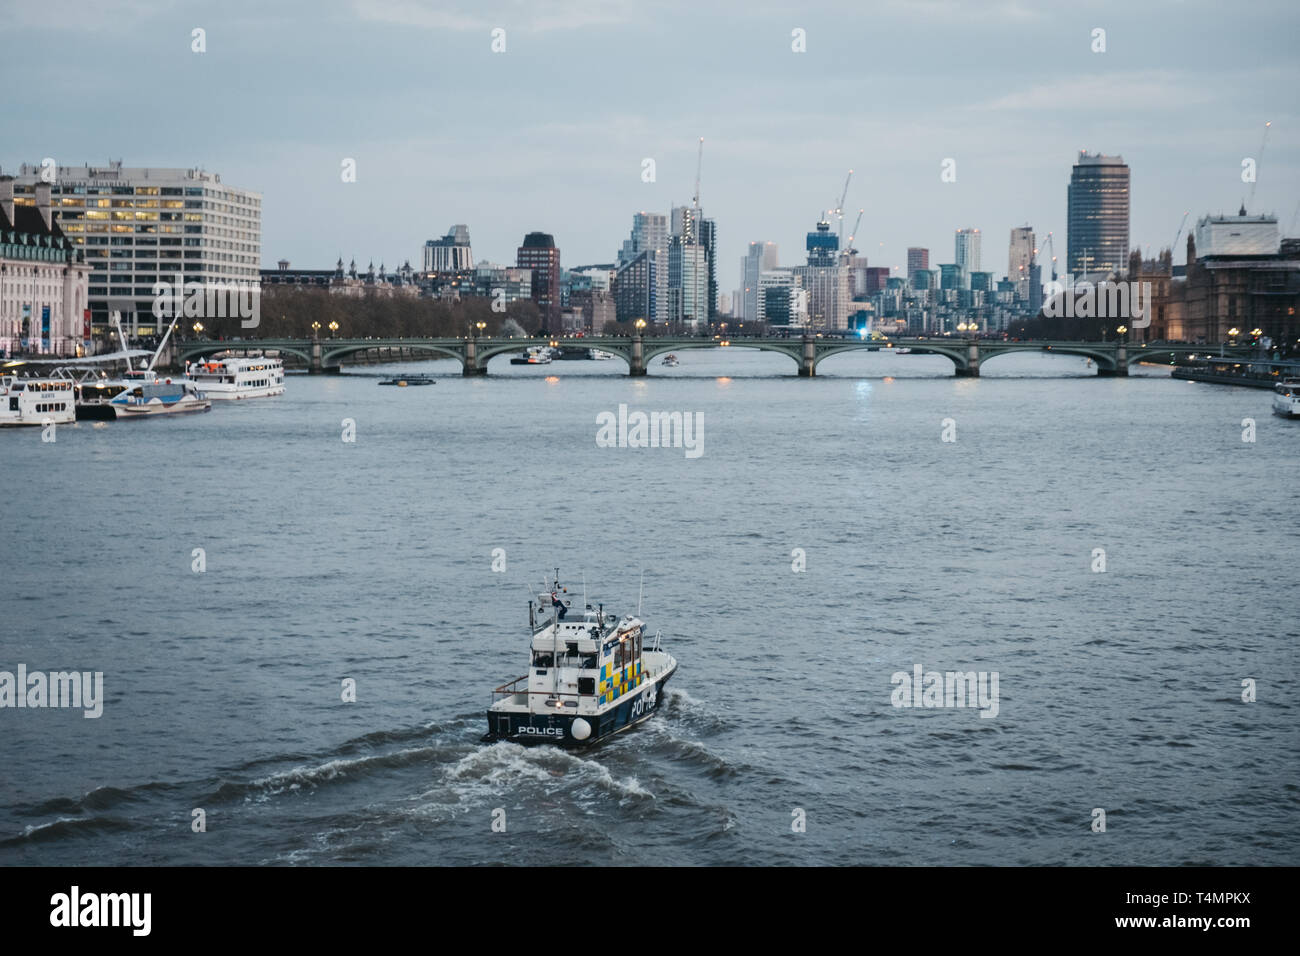 London, UK - April 13, 2019: Metropolitan Police Marine Policing Unit (MPU) on the River Thames, London on the background. MPU fleet is responsible fo Stock Photo